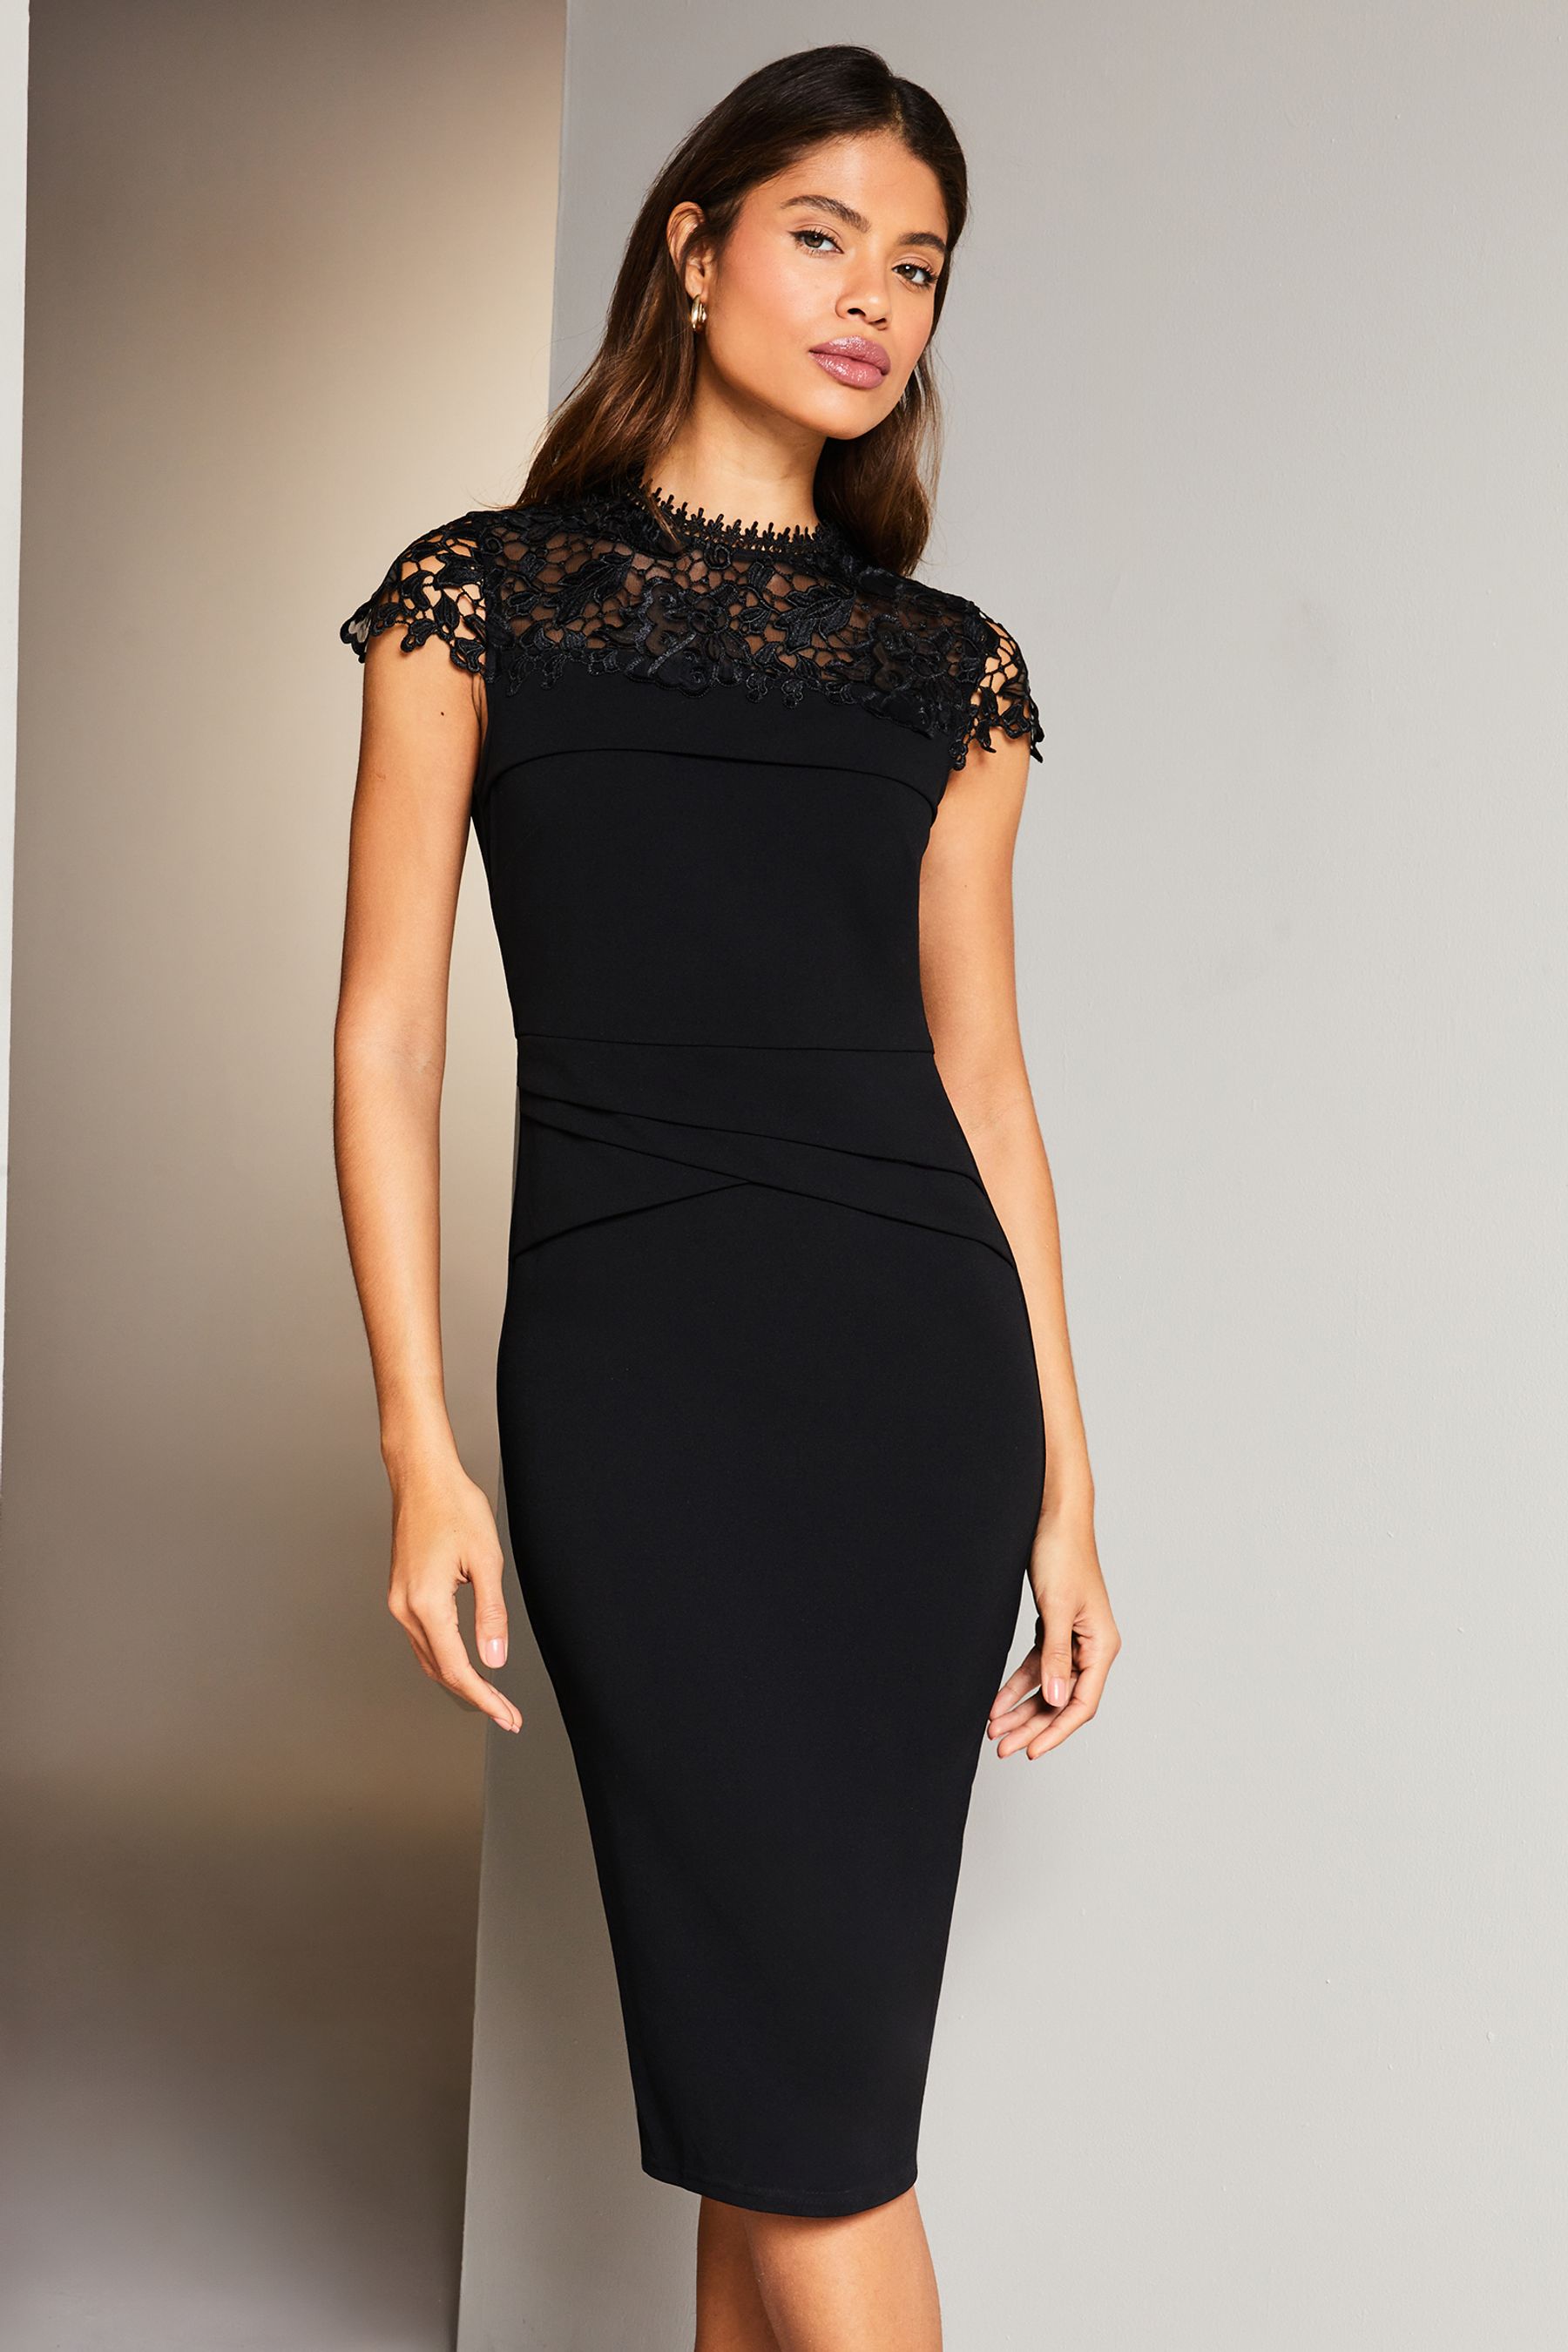 Buy Lipsy Black Lace Top Bodycon Dress from the Next UK online shop